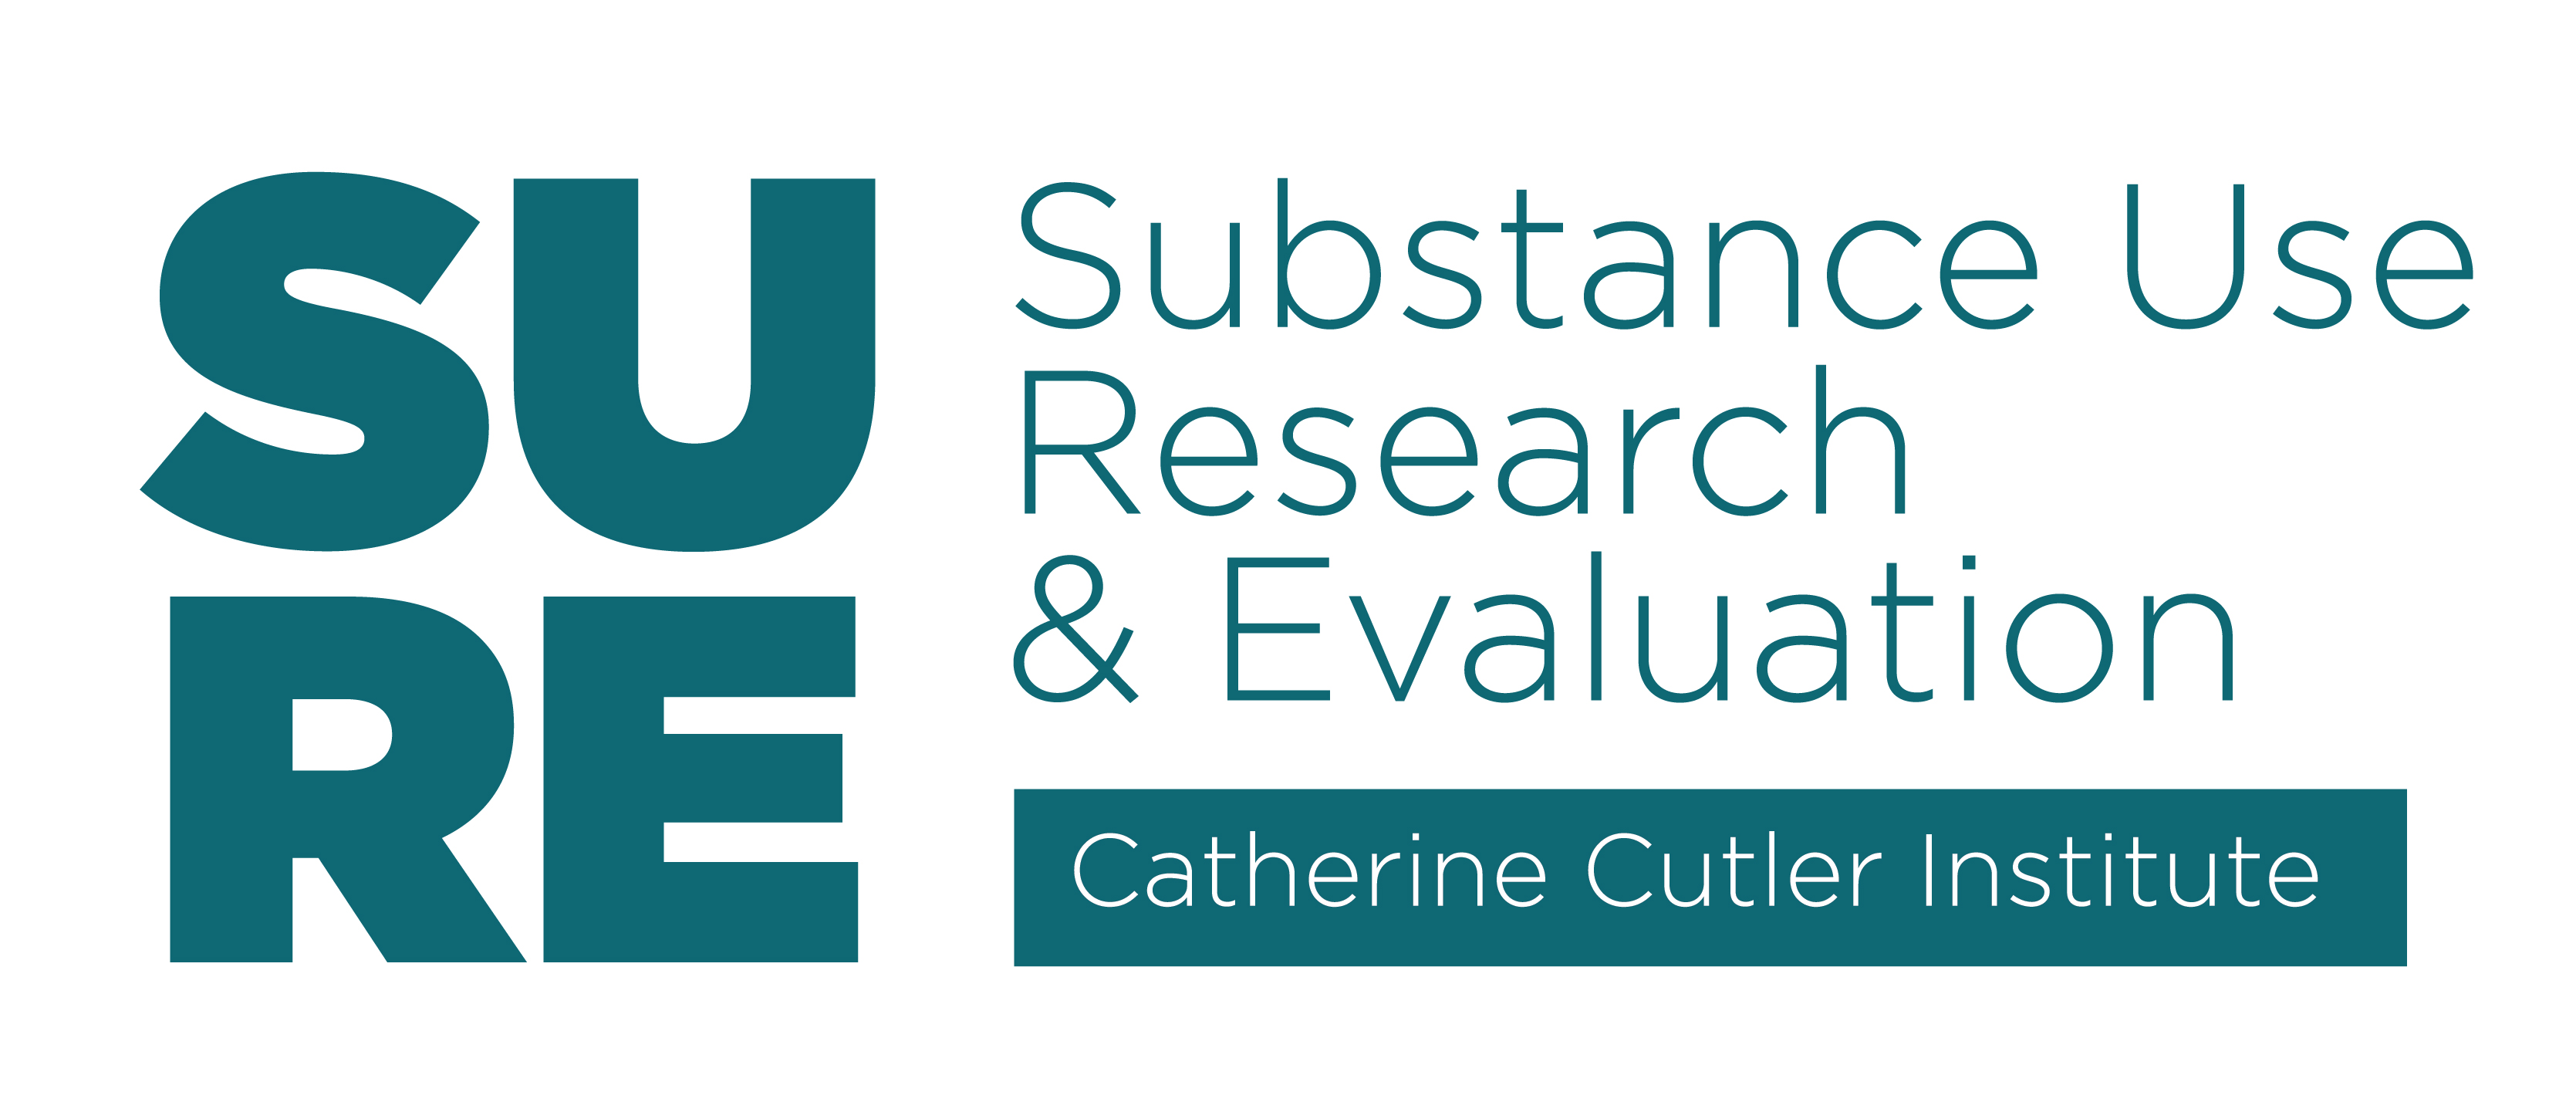 Substance Use Research & Evaluation